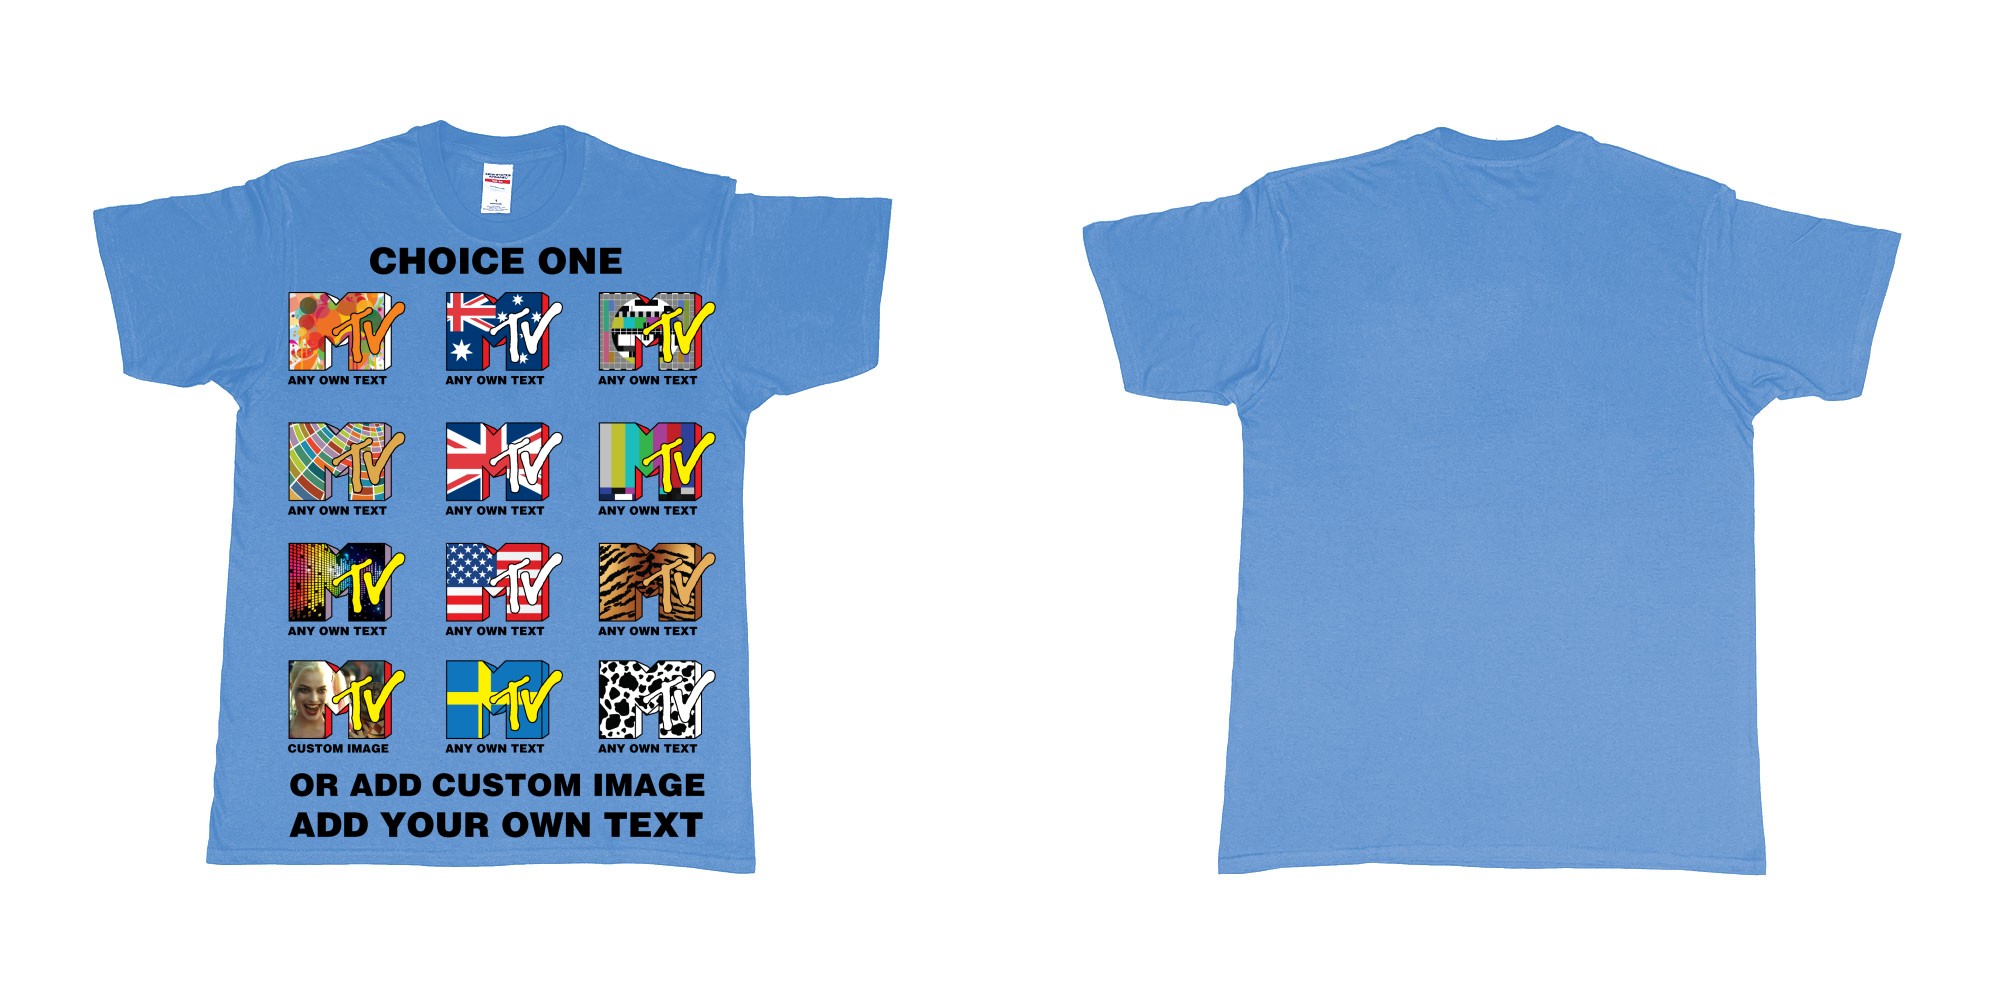 Custom tshirt design mtv logo choice any background text print in fabric color carolina-blue choice your own text made in Bali by The Pirate Way